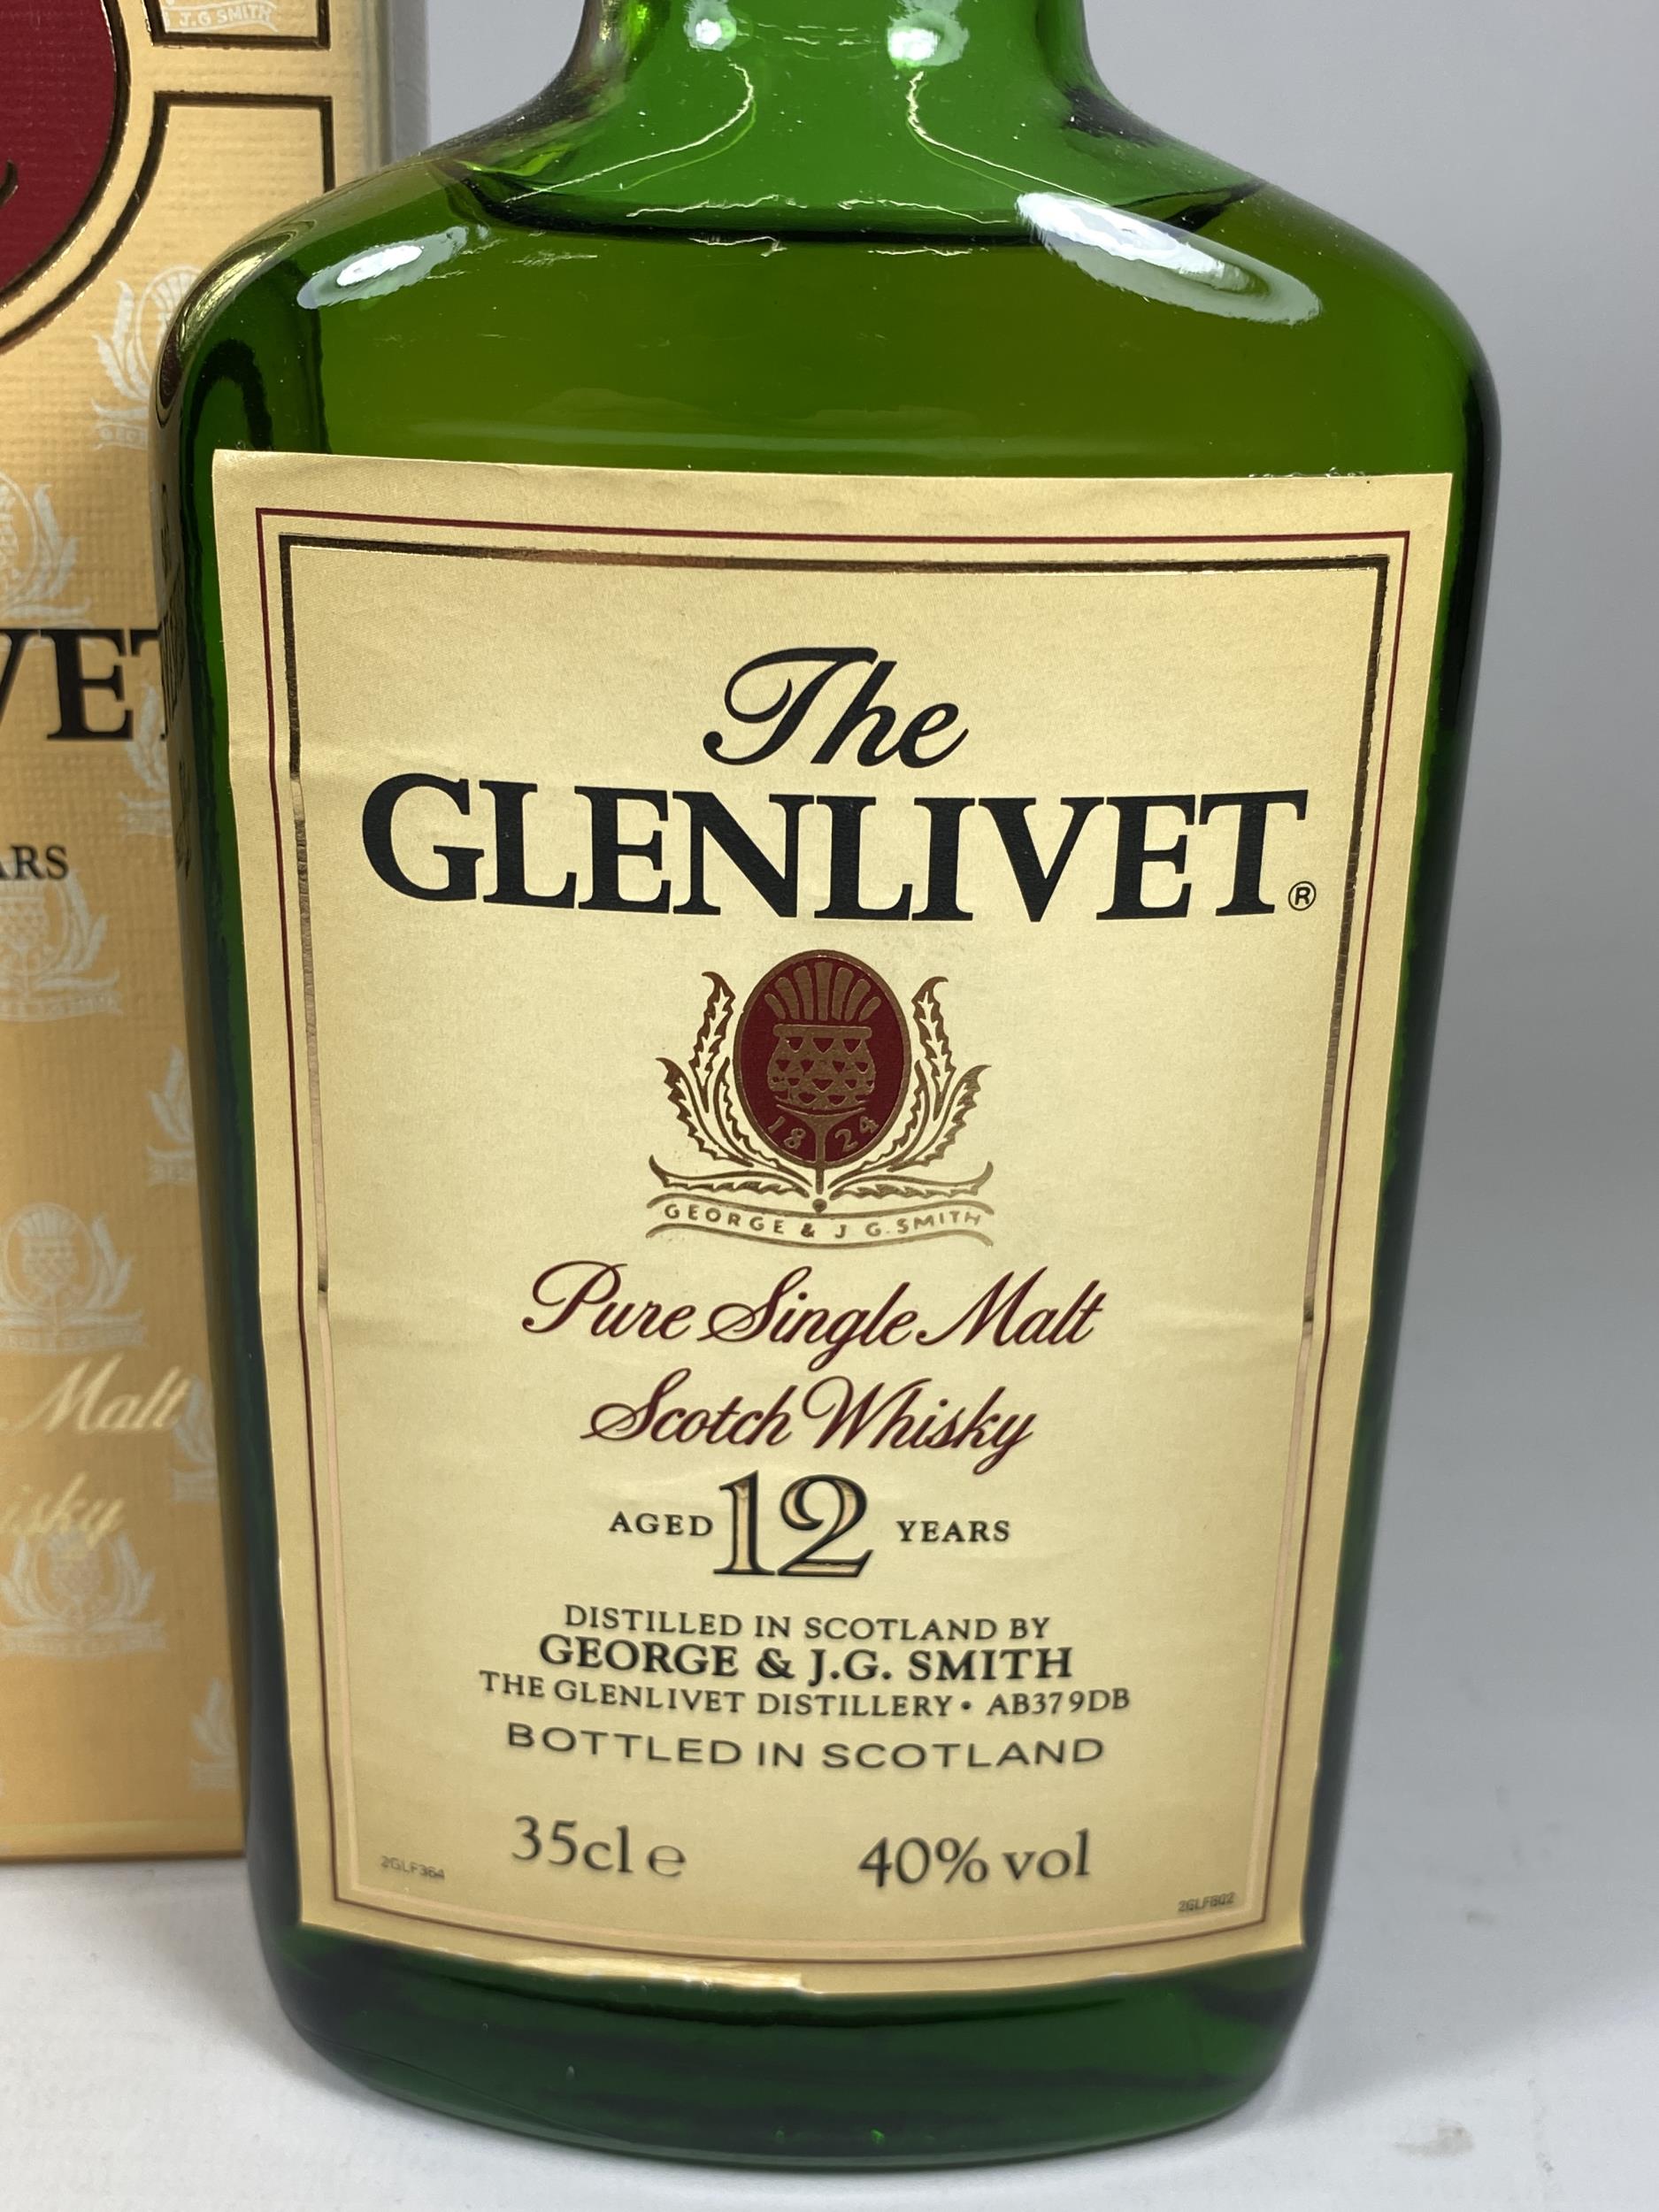 1 X BOXED 35CL BOTTLE - 1980/1990'S THE GLENLIVET 12 YEAR OLD PURE SINGLE MALT SCOTCH WHISKY - Image 2 of 3